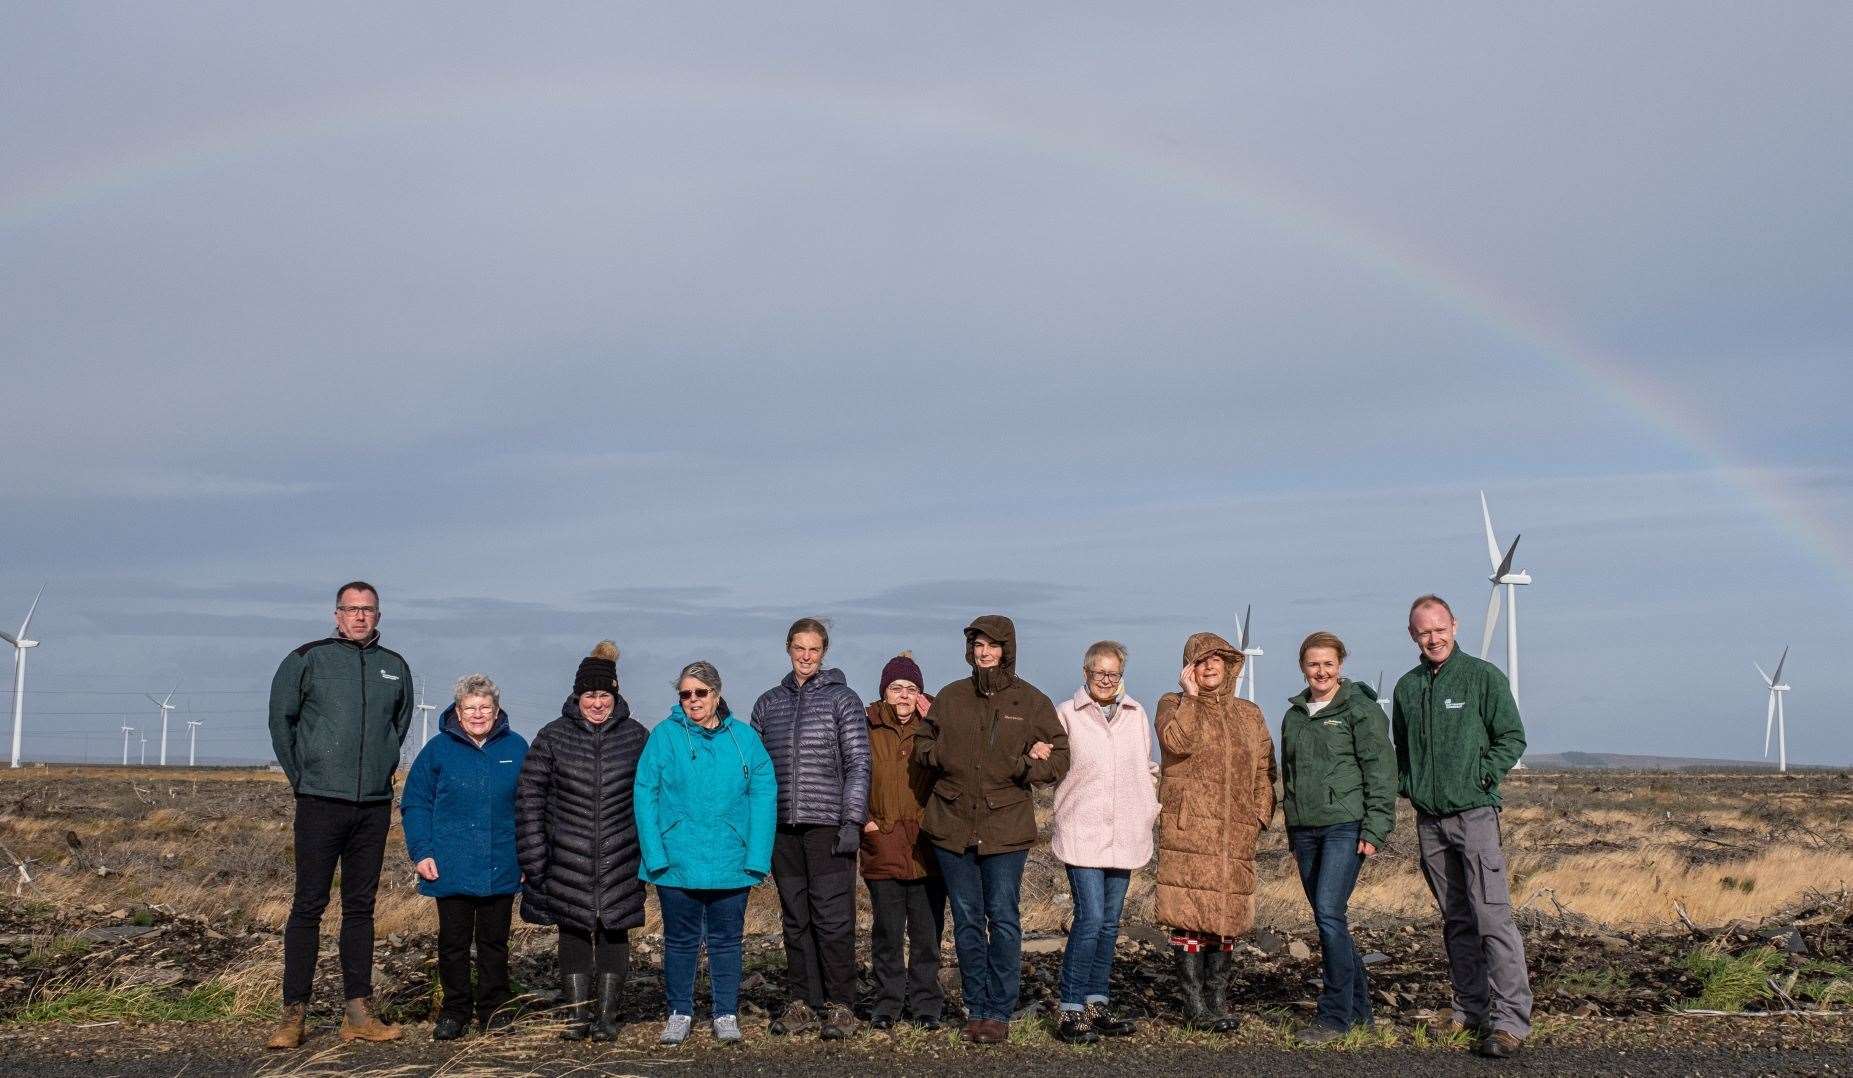 Community representatives from across Caithness joined ScottishPower Renewables at Halsary wind farm to launch the new £3.75 million community benefit fund.